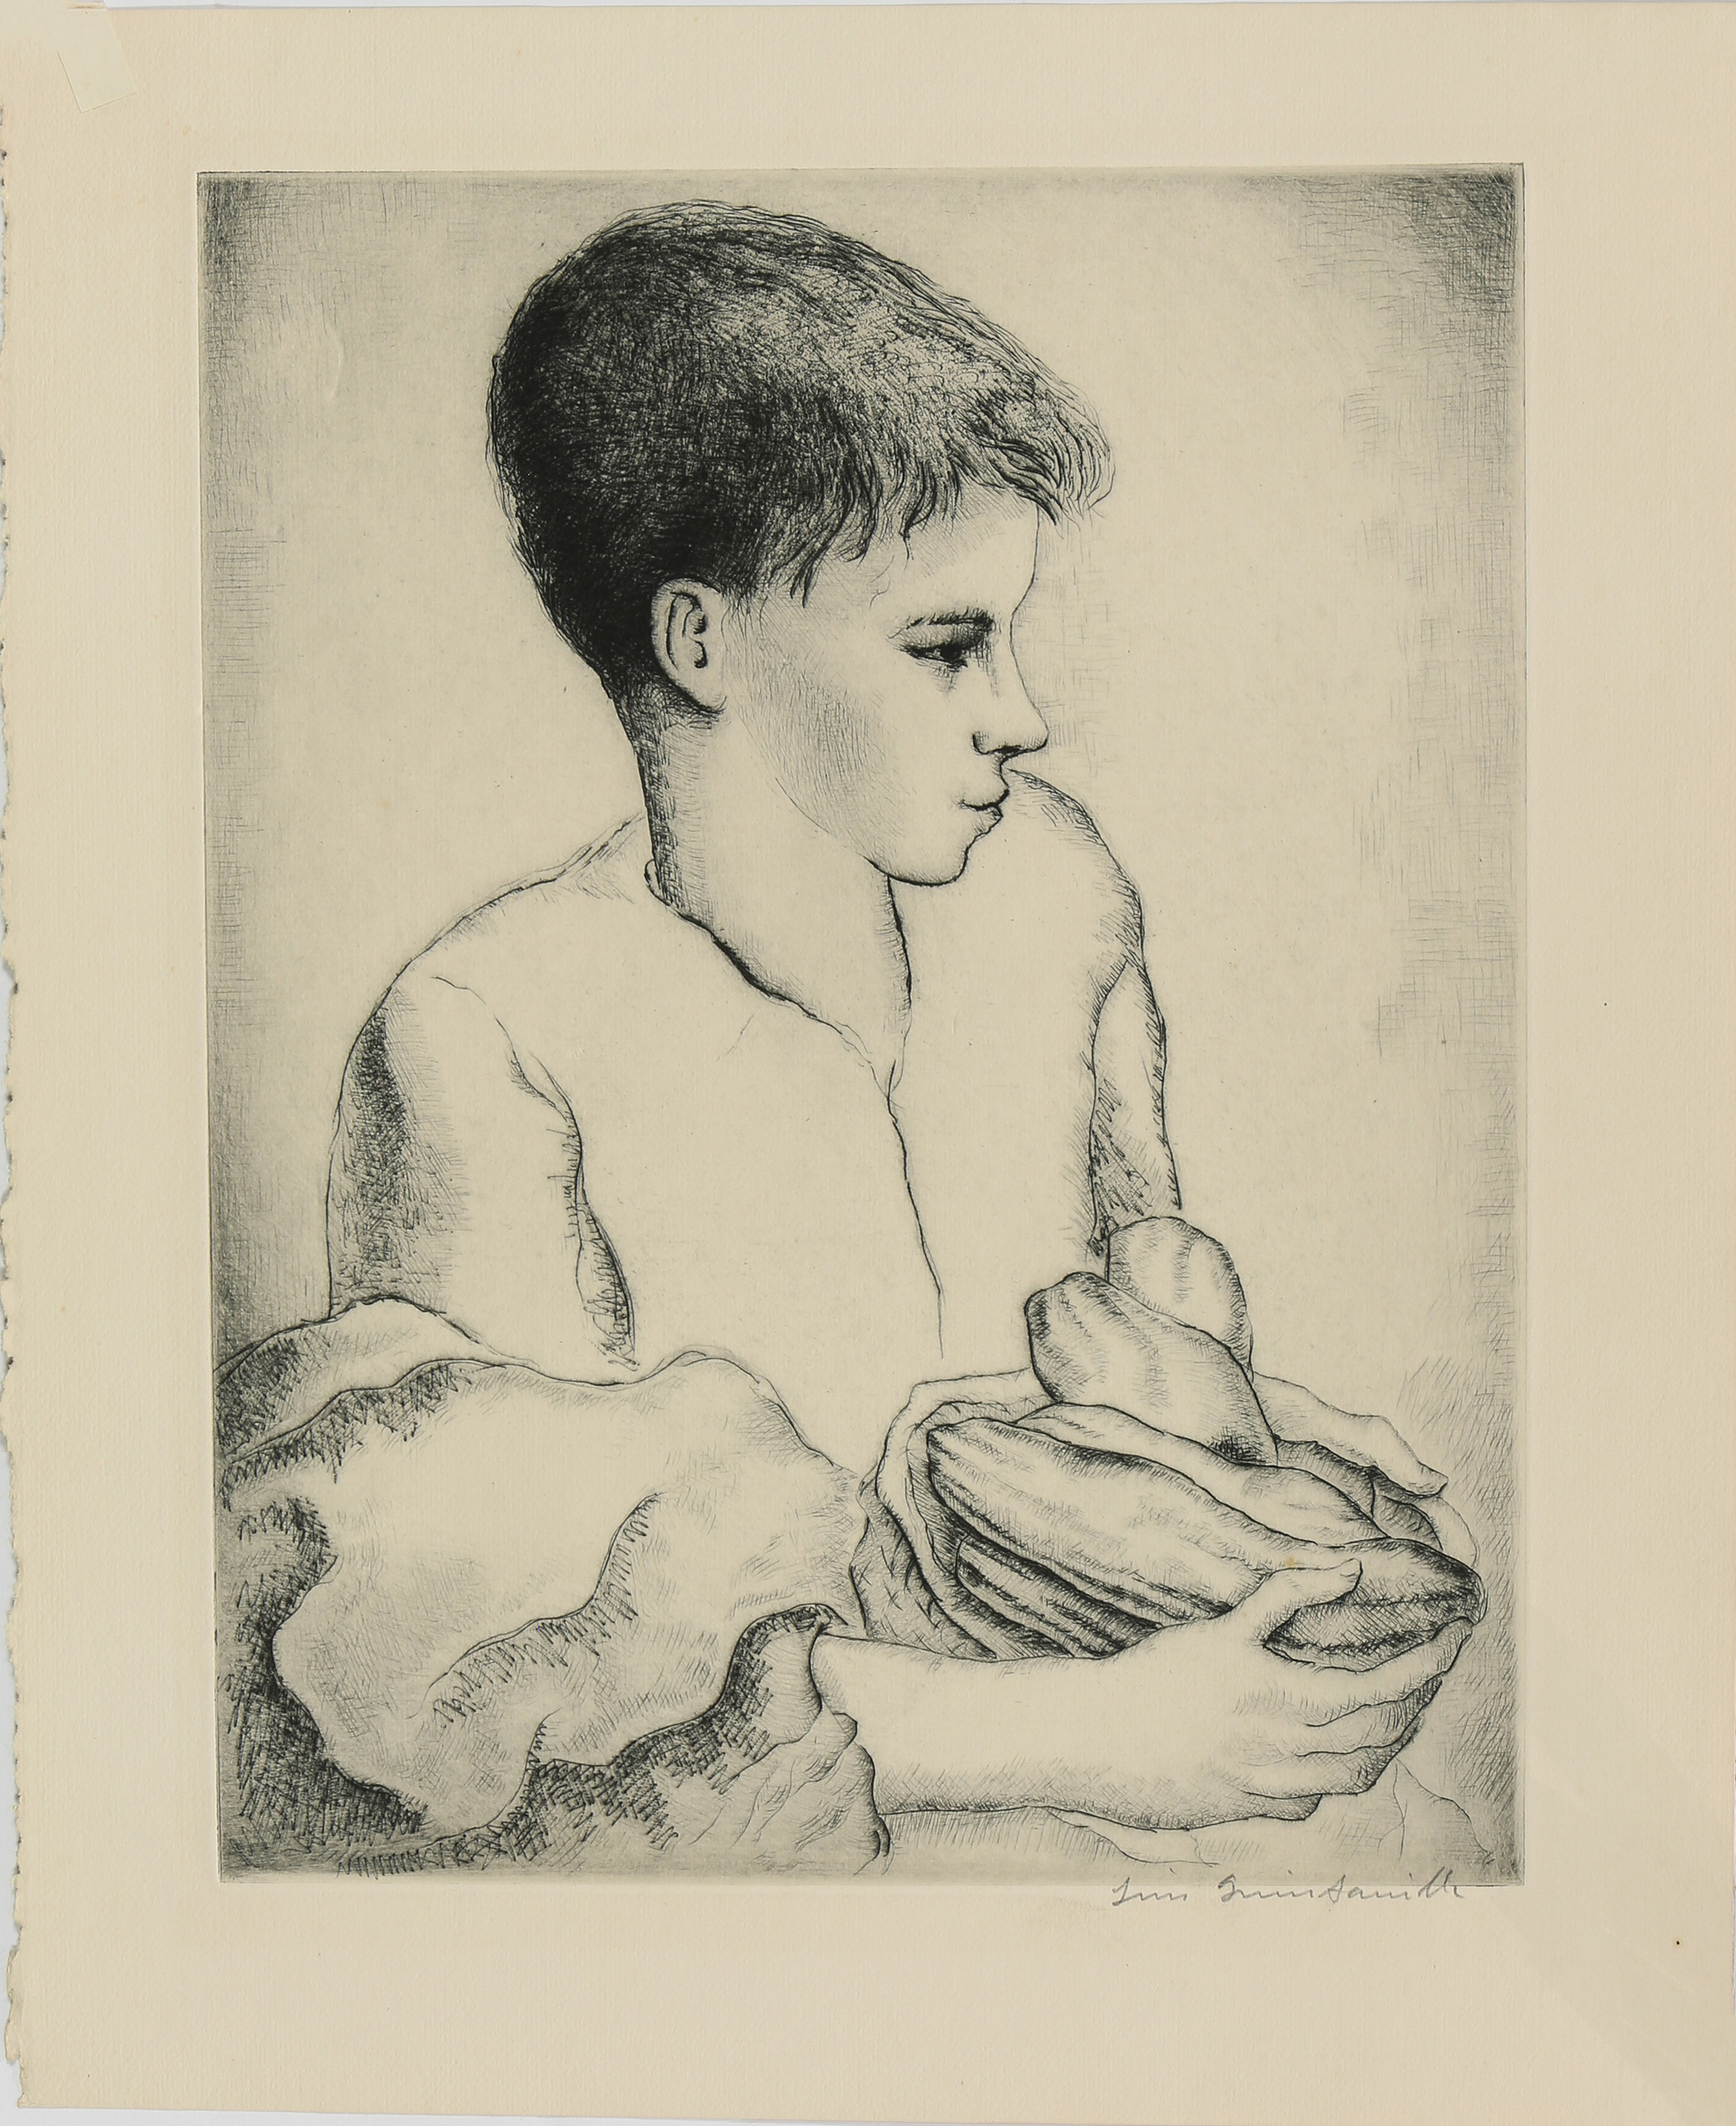 PRINT, YOUNG BOY WITH BOWL American